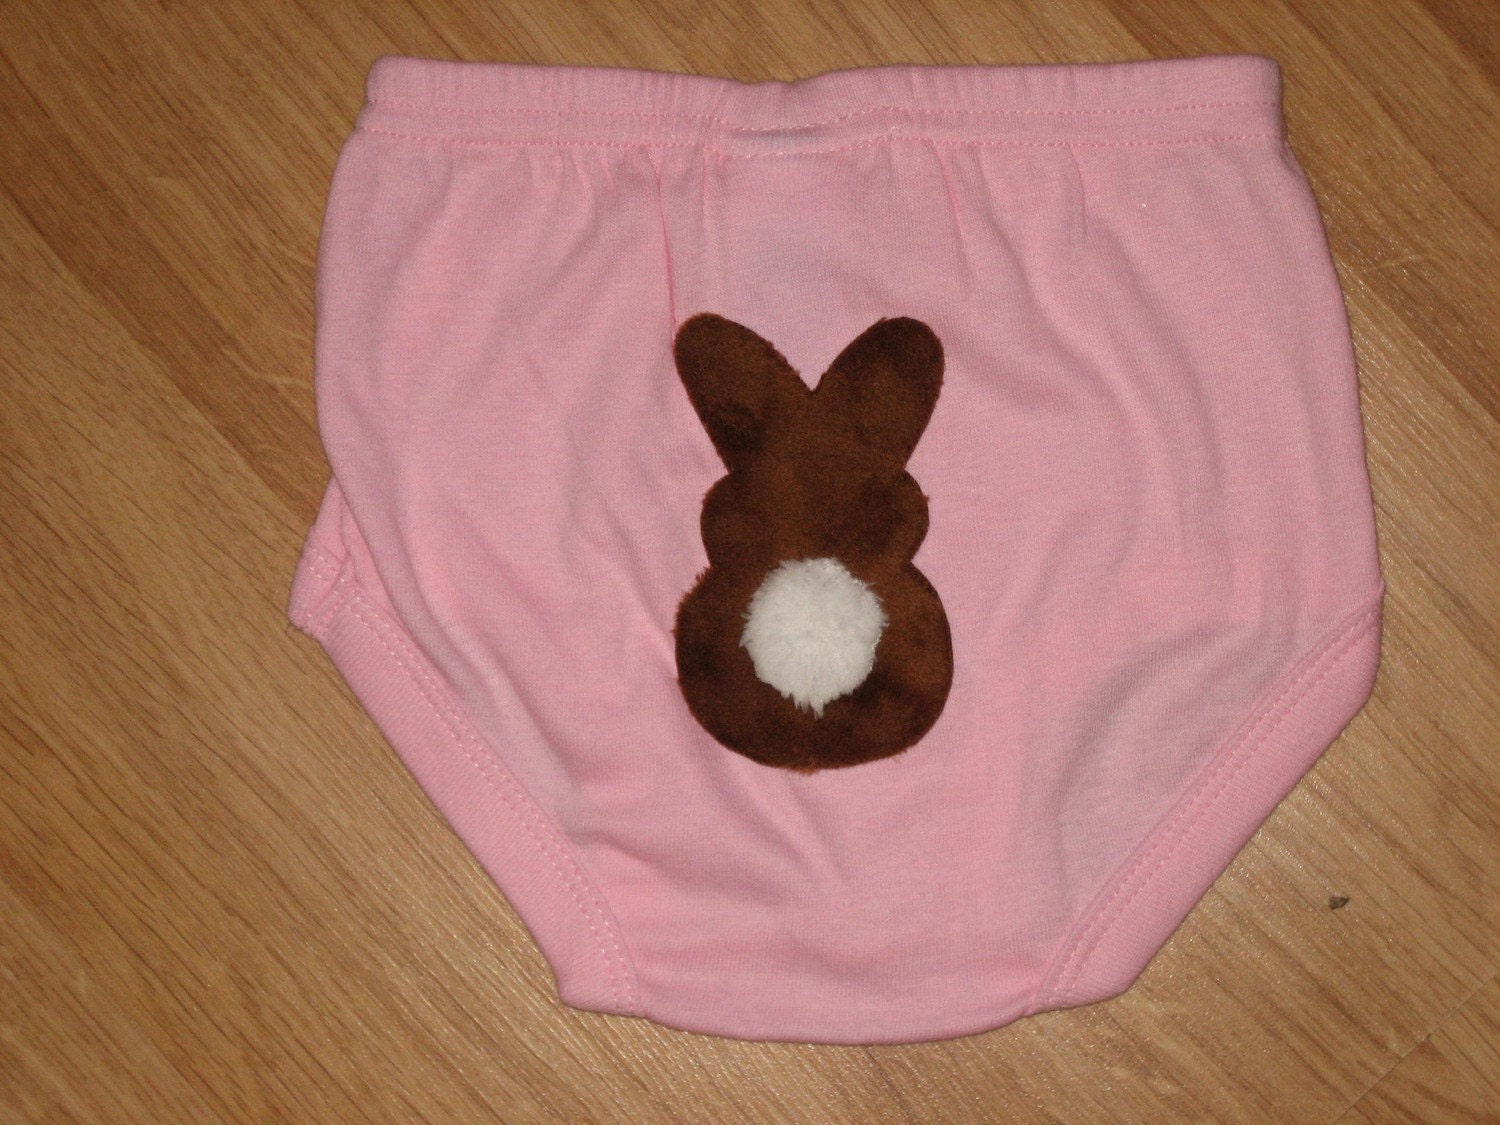 Chocolate Easter Bunny diaper cover/bloomers in Blue, Pink or White